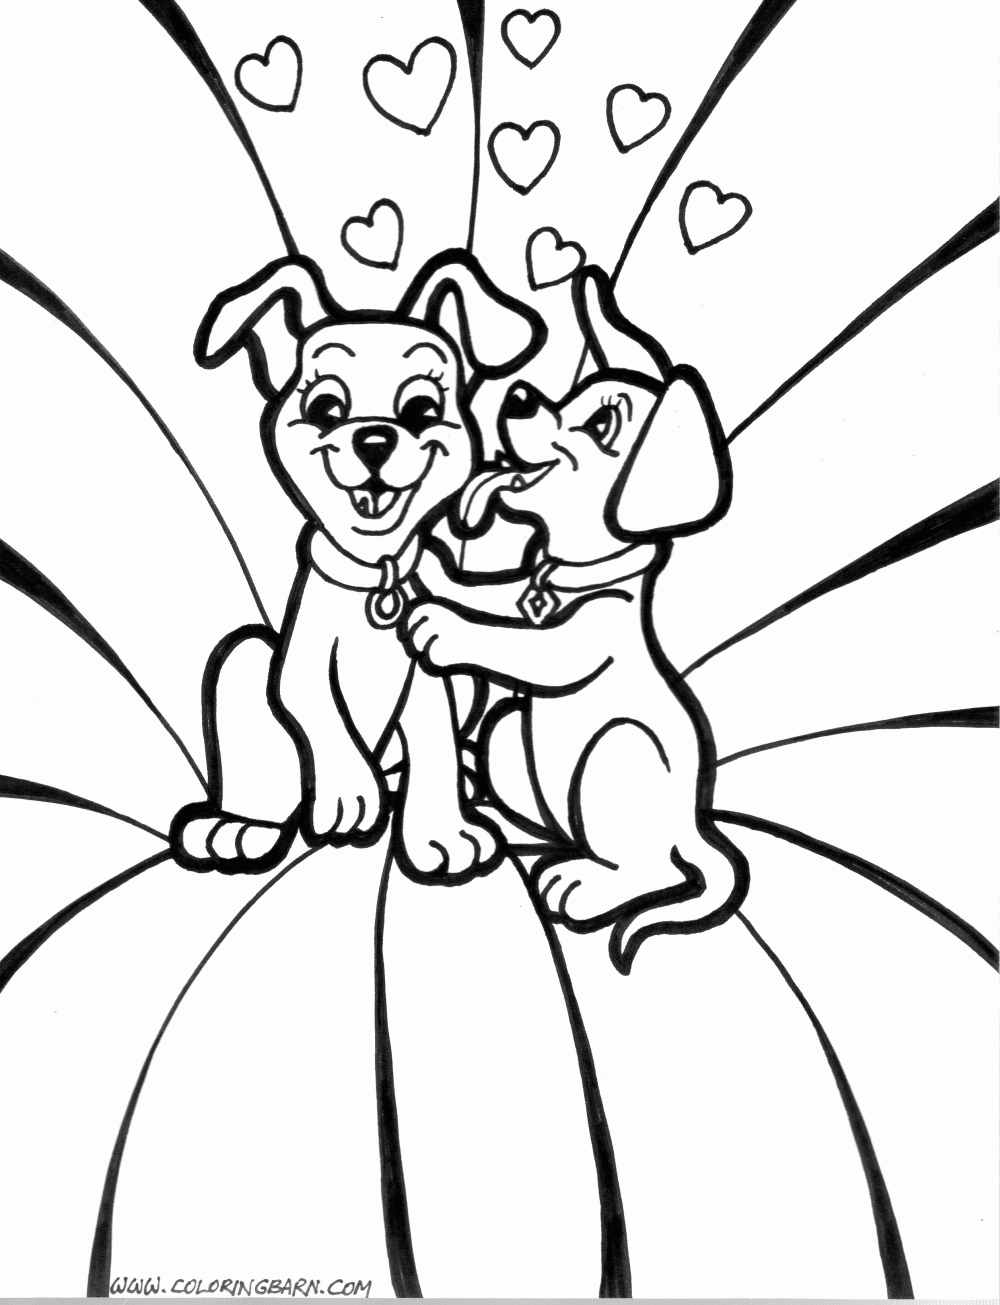 Printable Coloring Pages Puppies - Coloring Home